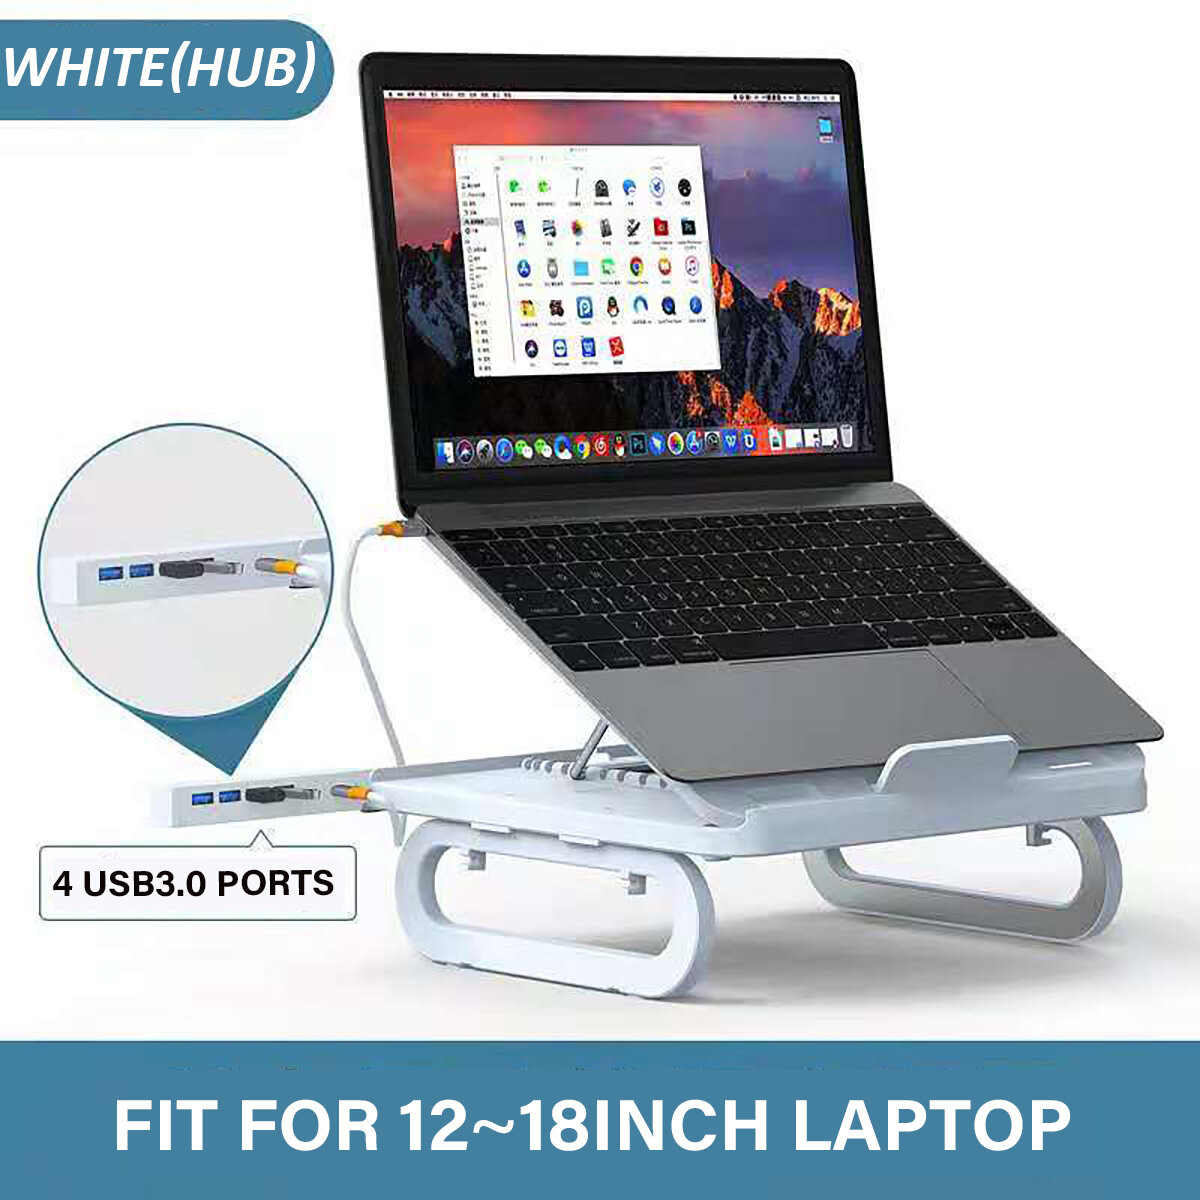 best price,universal,4xusb,ports,gear,laptop,stand,18inch,discount